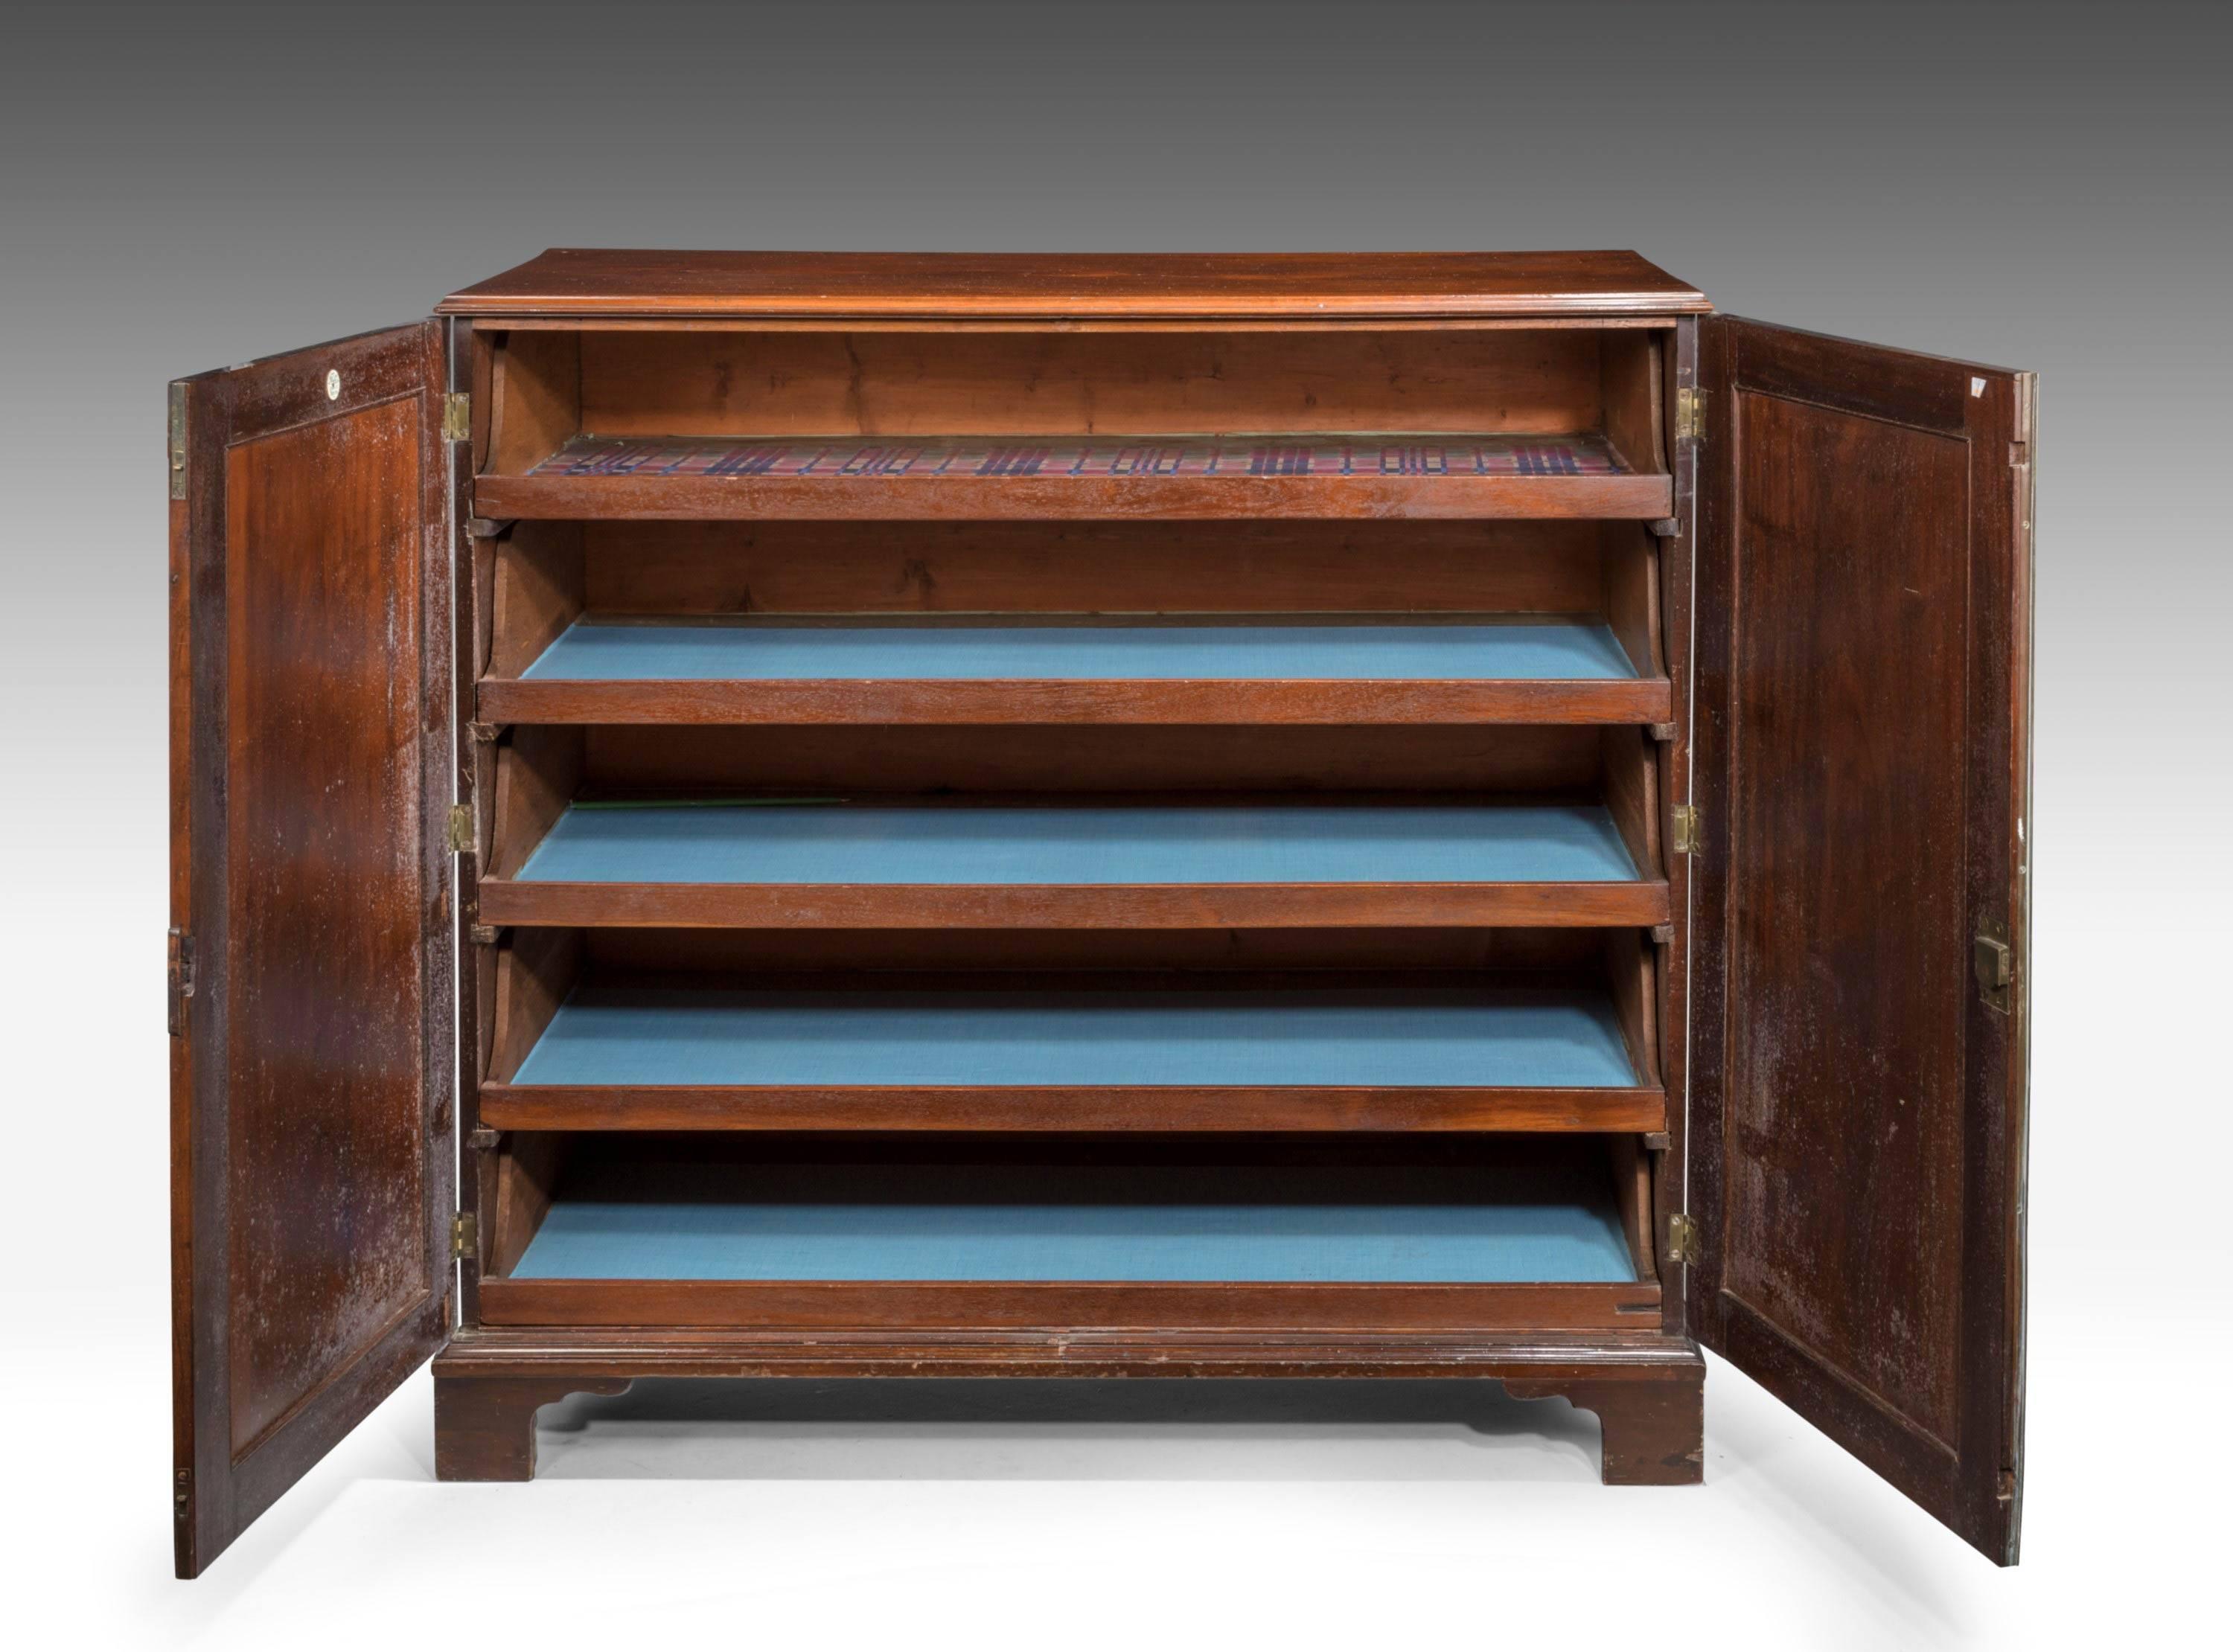 A particularly handsome George III period mahogany dwarf press. The interior with the original fitted shelves. The beautifully figured flamed oval panels to the doors, surrounded with crossbanded borders and satinwood extremes.